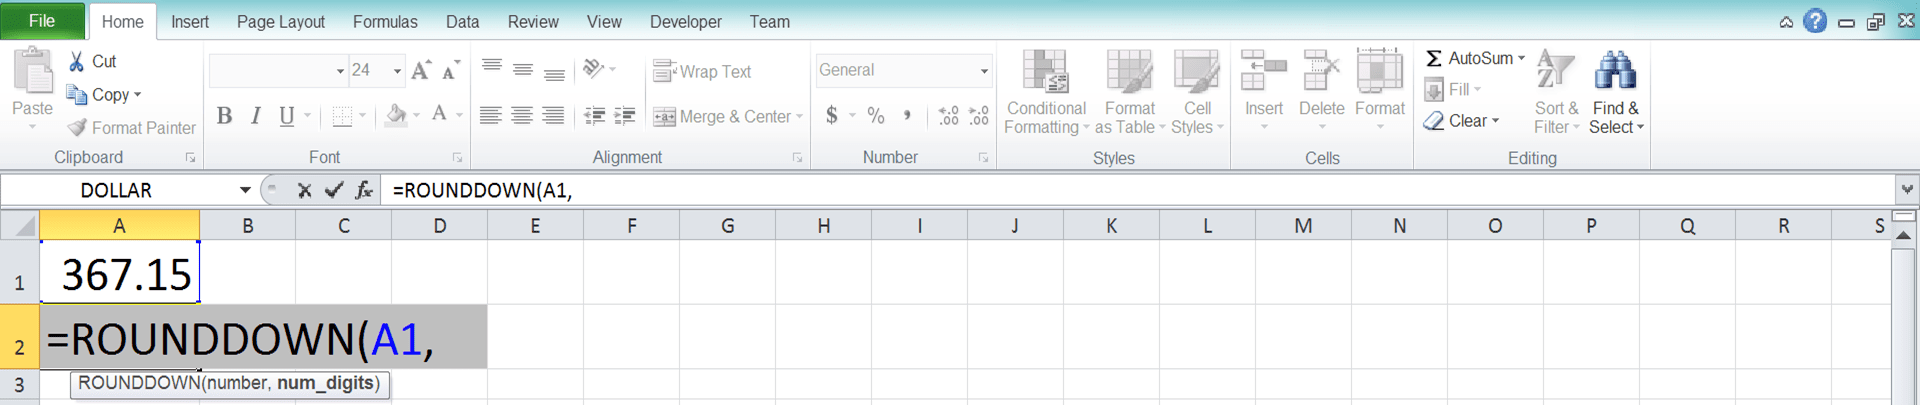 Excel ROUNDDOWN Formula: Functions, Examples, and How to Use - Screenshot of Step 3